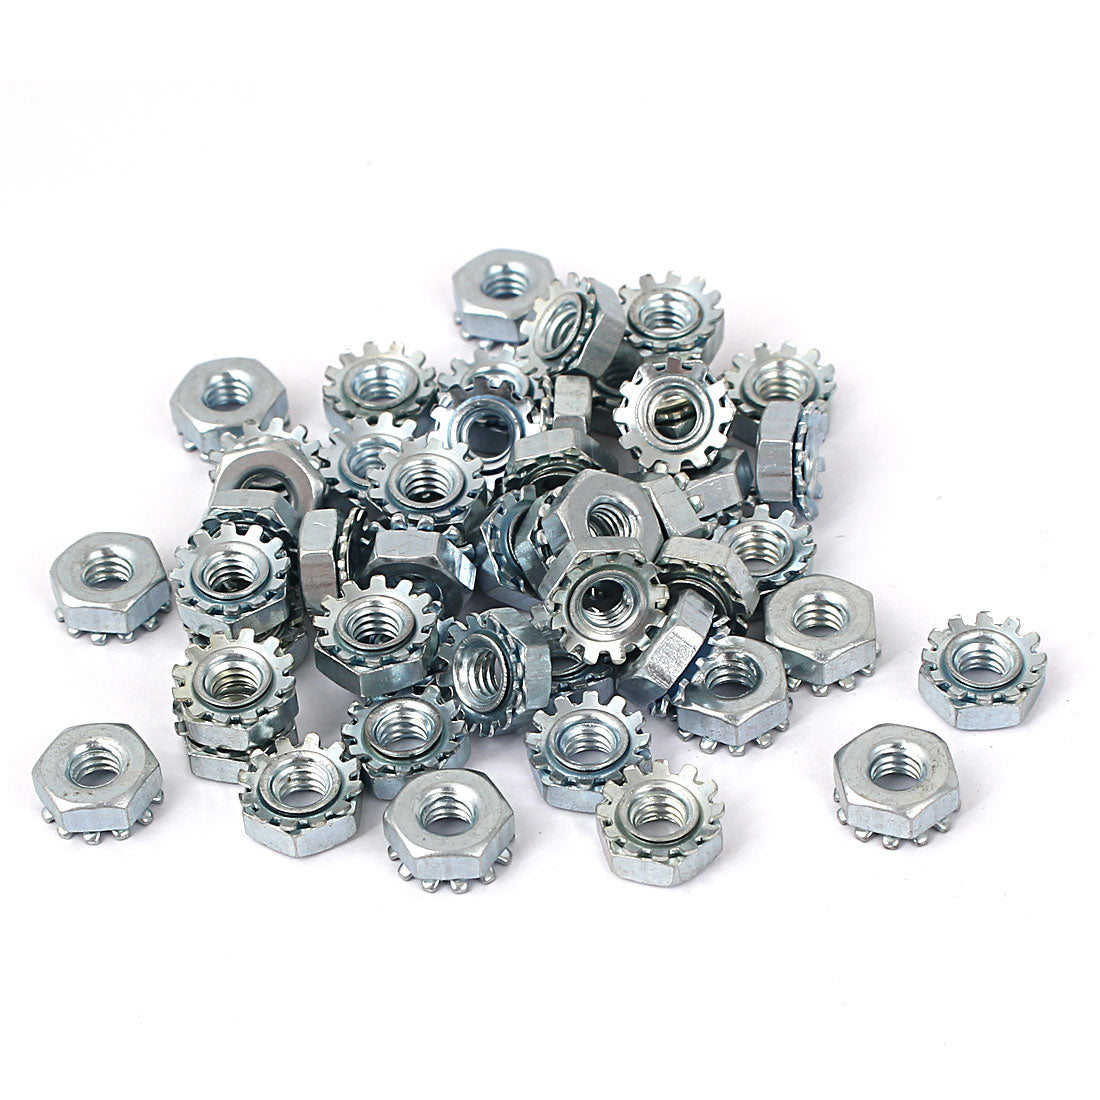 uxcell Uxcell 8#-32 Female Thread Zinc Plated External Tooth K Lock Kep Nut Silver Tone 50pcs